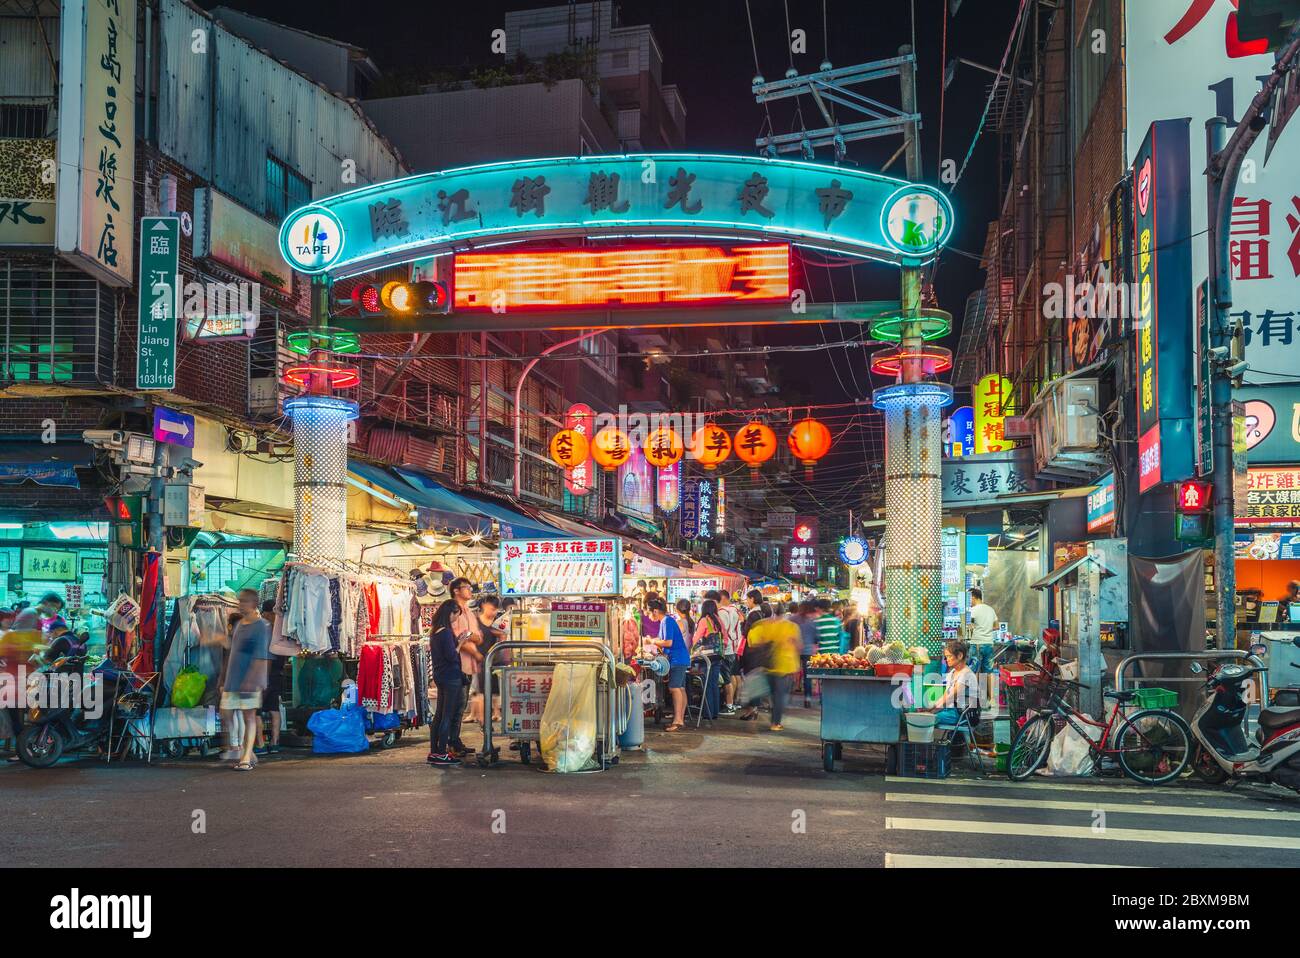 Taipei, Taiwan - September 11, 2015: night view of the entrance of Linjiang Street Night Market, one of the most popular night market in taipei Stock Photo